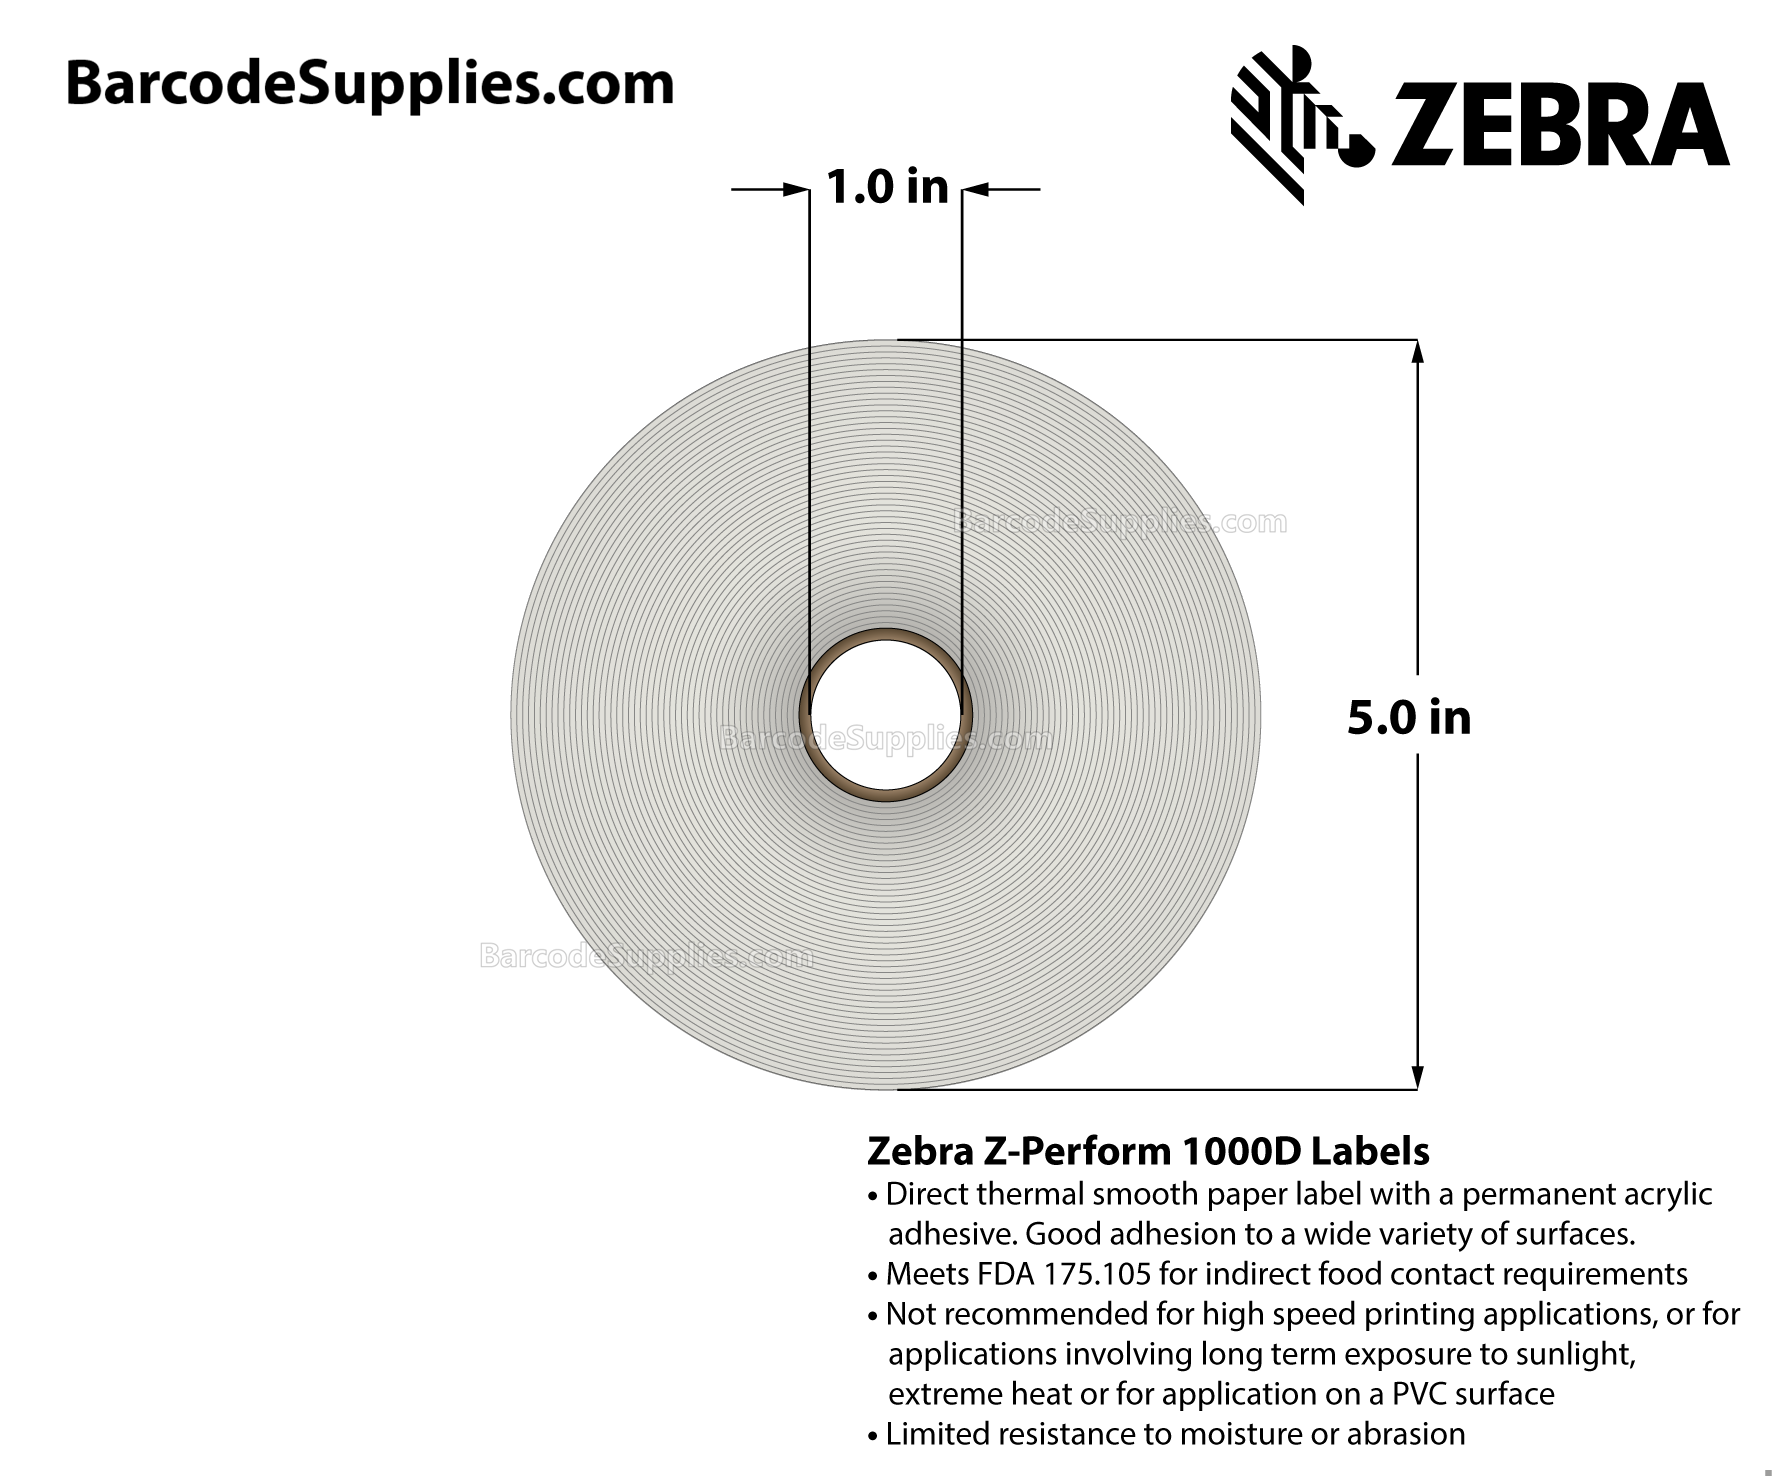 4 x 3 Direct Thermal White Z-Perform 1000D Labels With Permanent Adhesive - Perforated - 840 Labels Per Roll - Carton Of 6 Rolls - 5040 Labels Total - MPN: 10026380